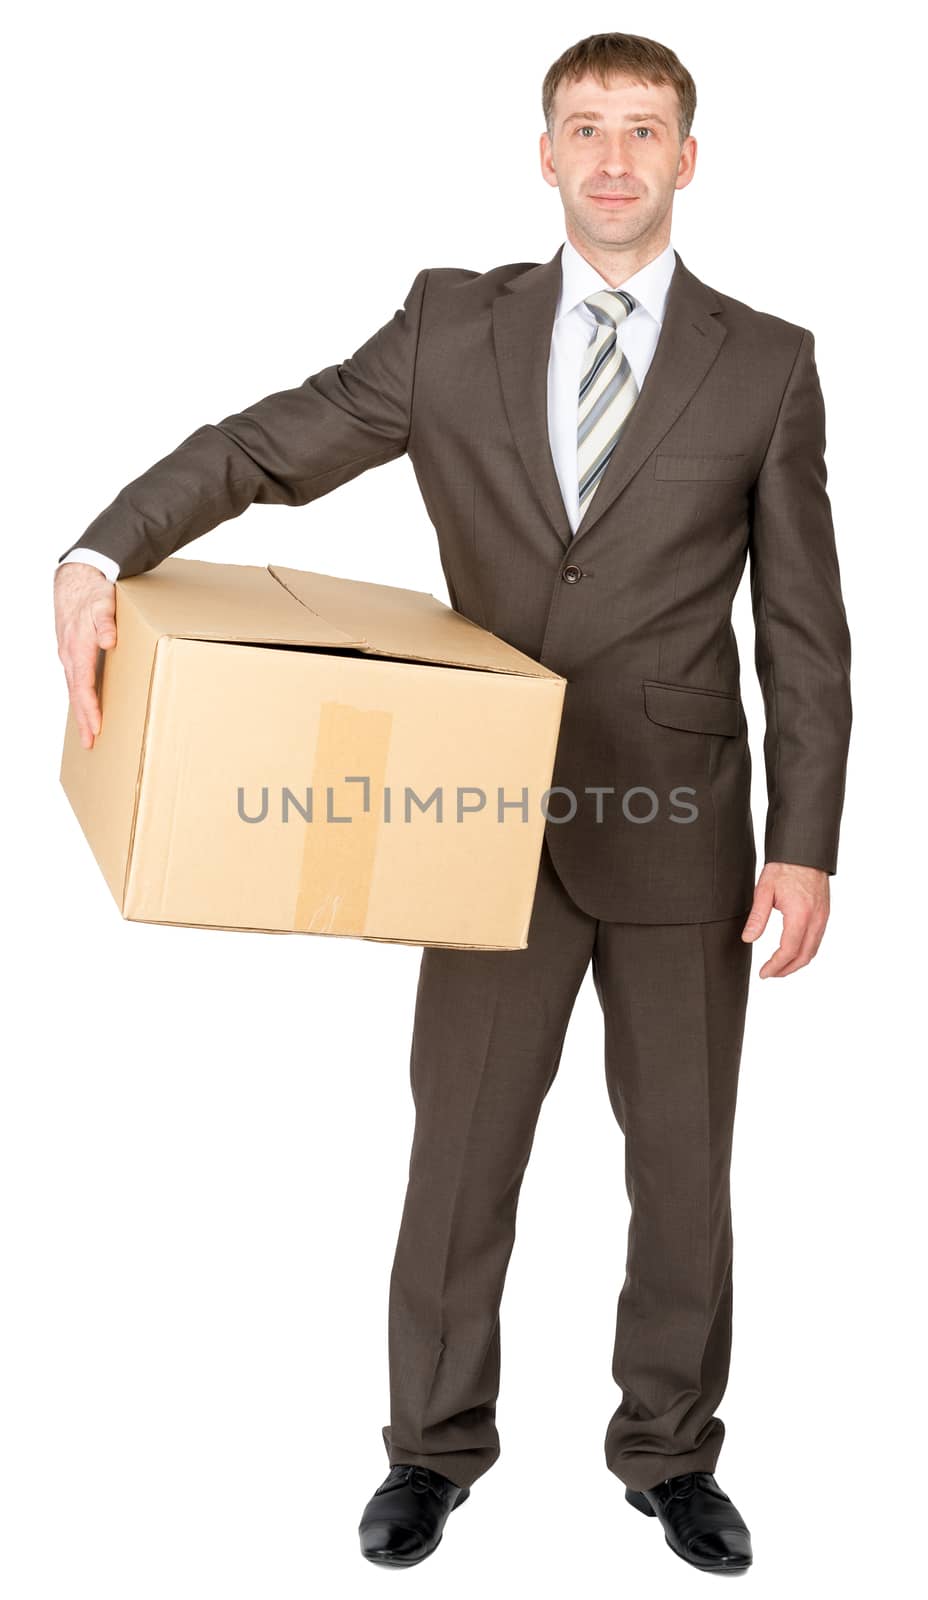 Shop assistant brings parcel, isolated on white background